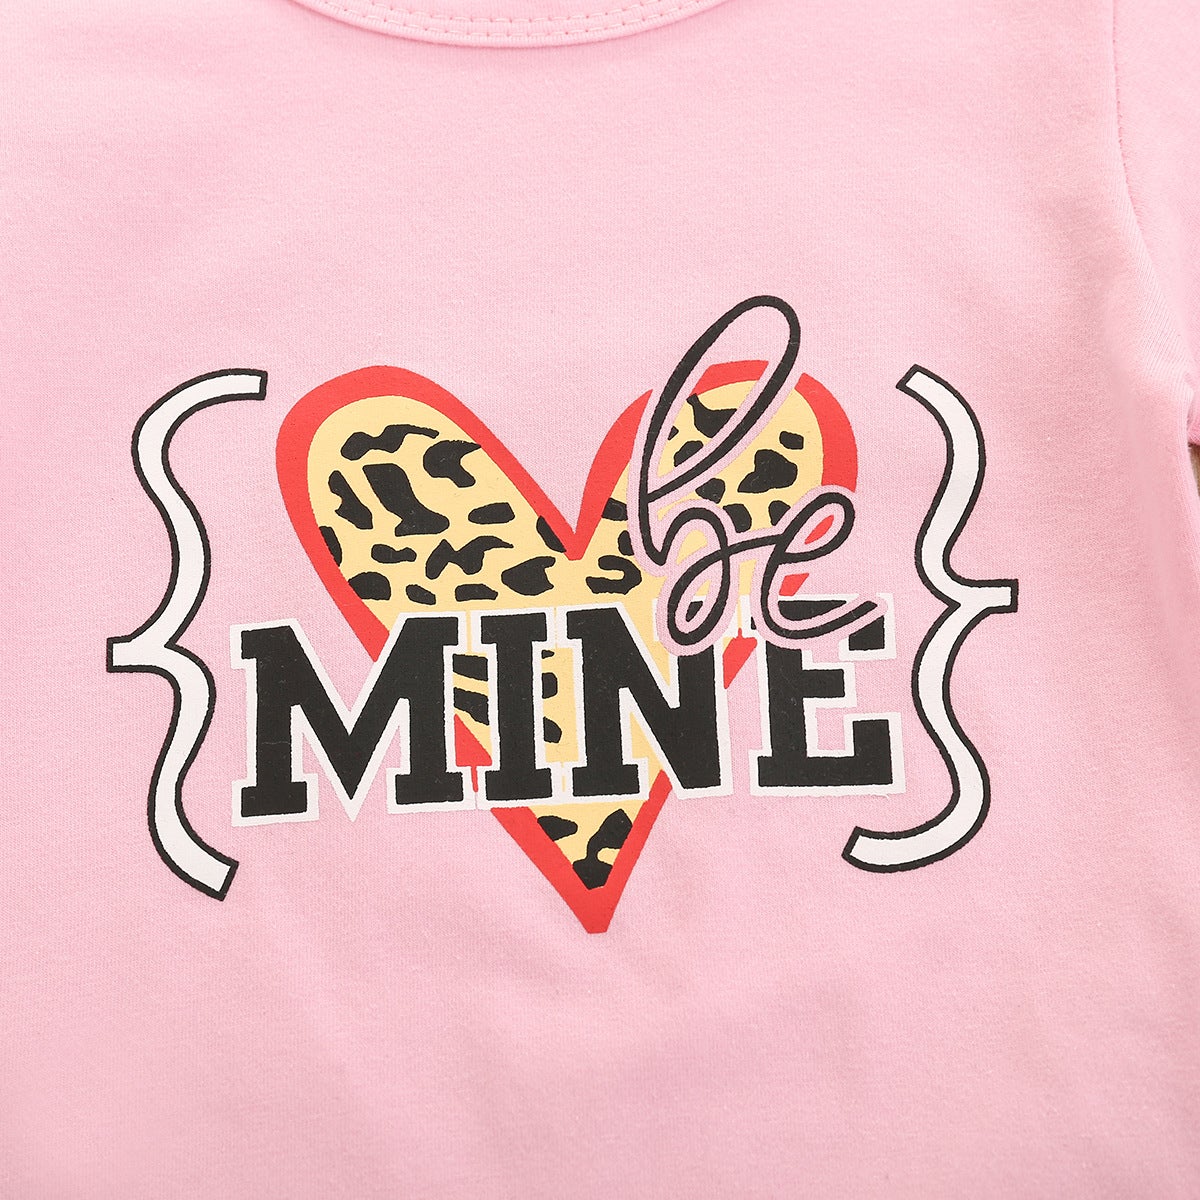 Baby Kid Girl Suit Valentine's Day Letter-printed Leopard Love 2 Pcs Sets